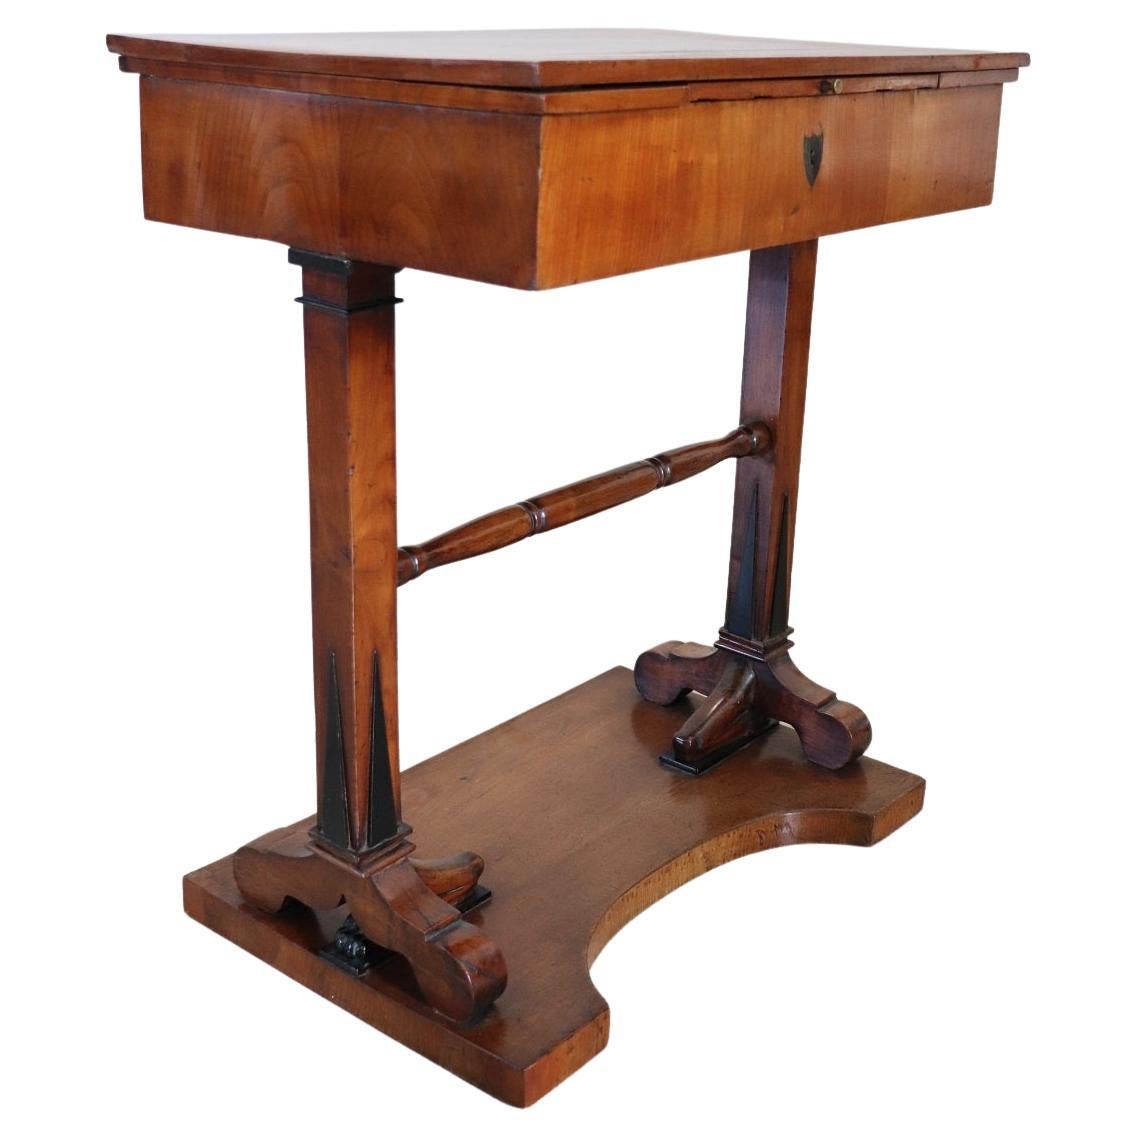 Early 19th Century Empire Cherry Wood Antique Side Table with Internal Desk Top